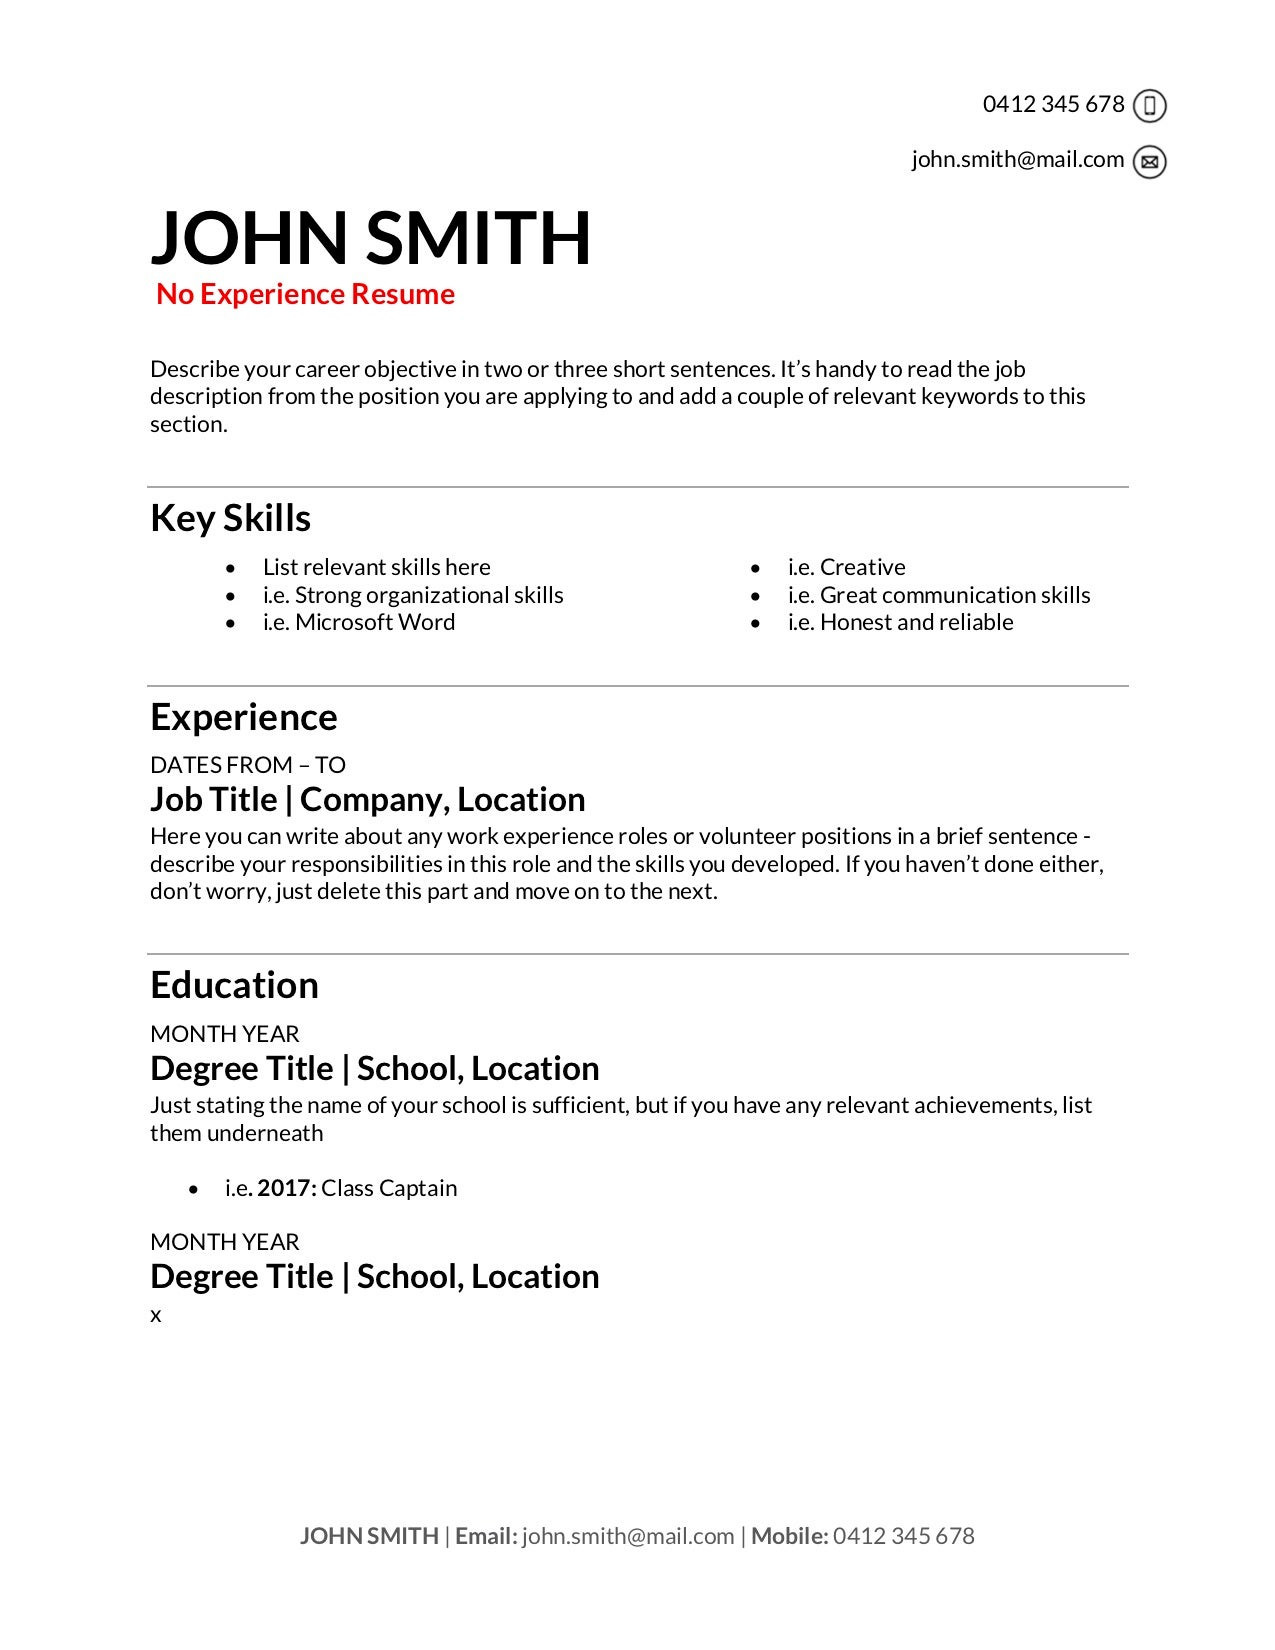 Resume for 15 Year Old First Job Template Free Resume Templates [download]: How to Write A Resume In 2021 …